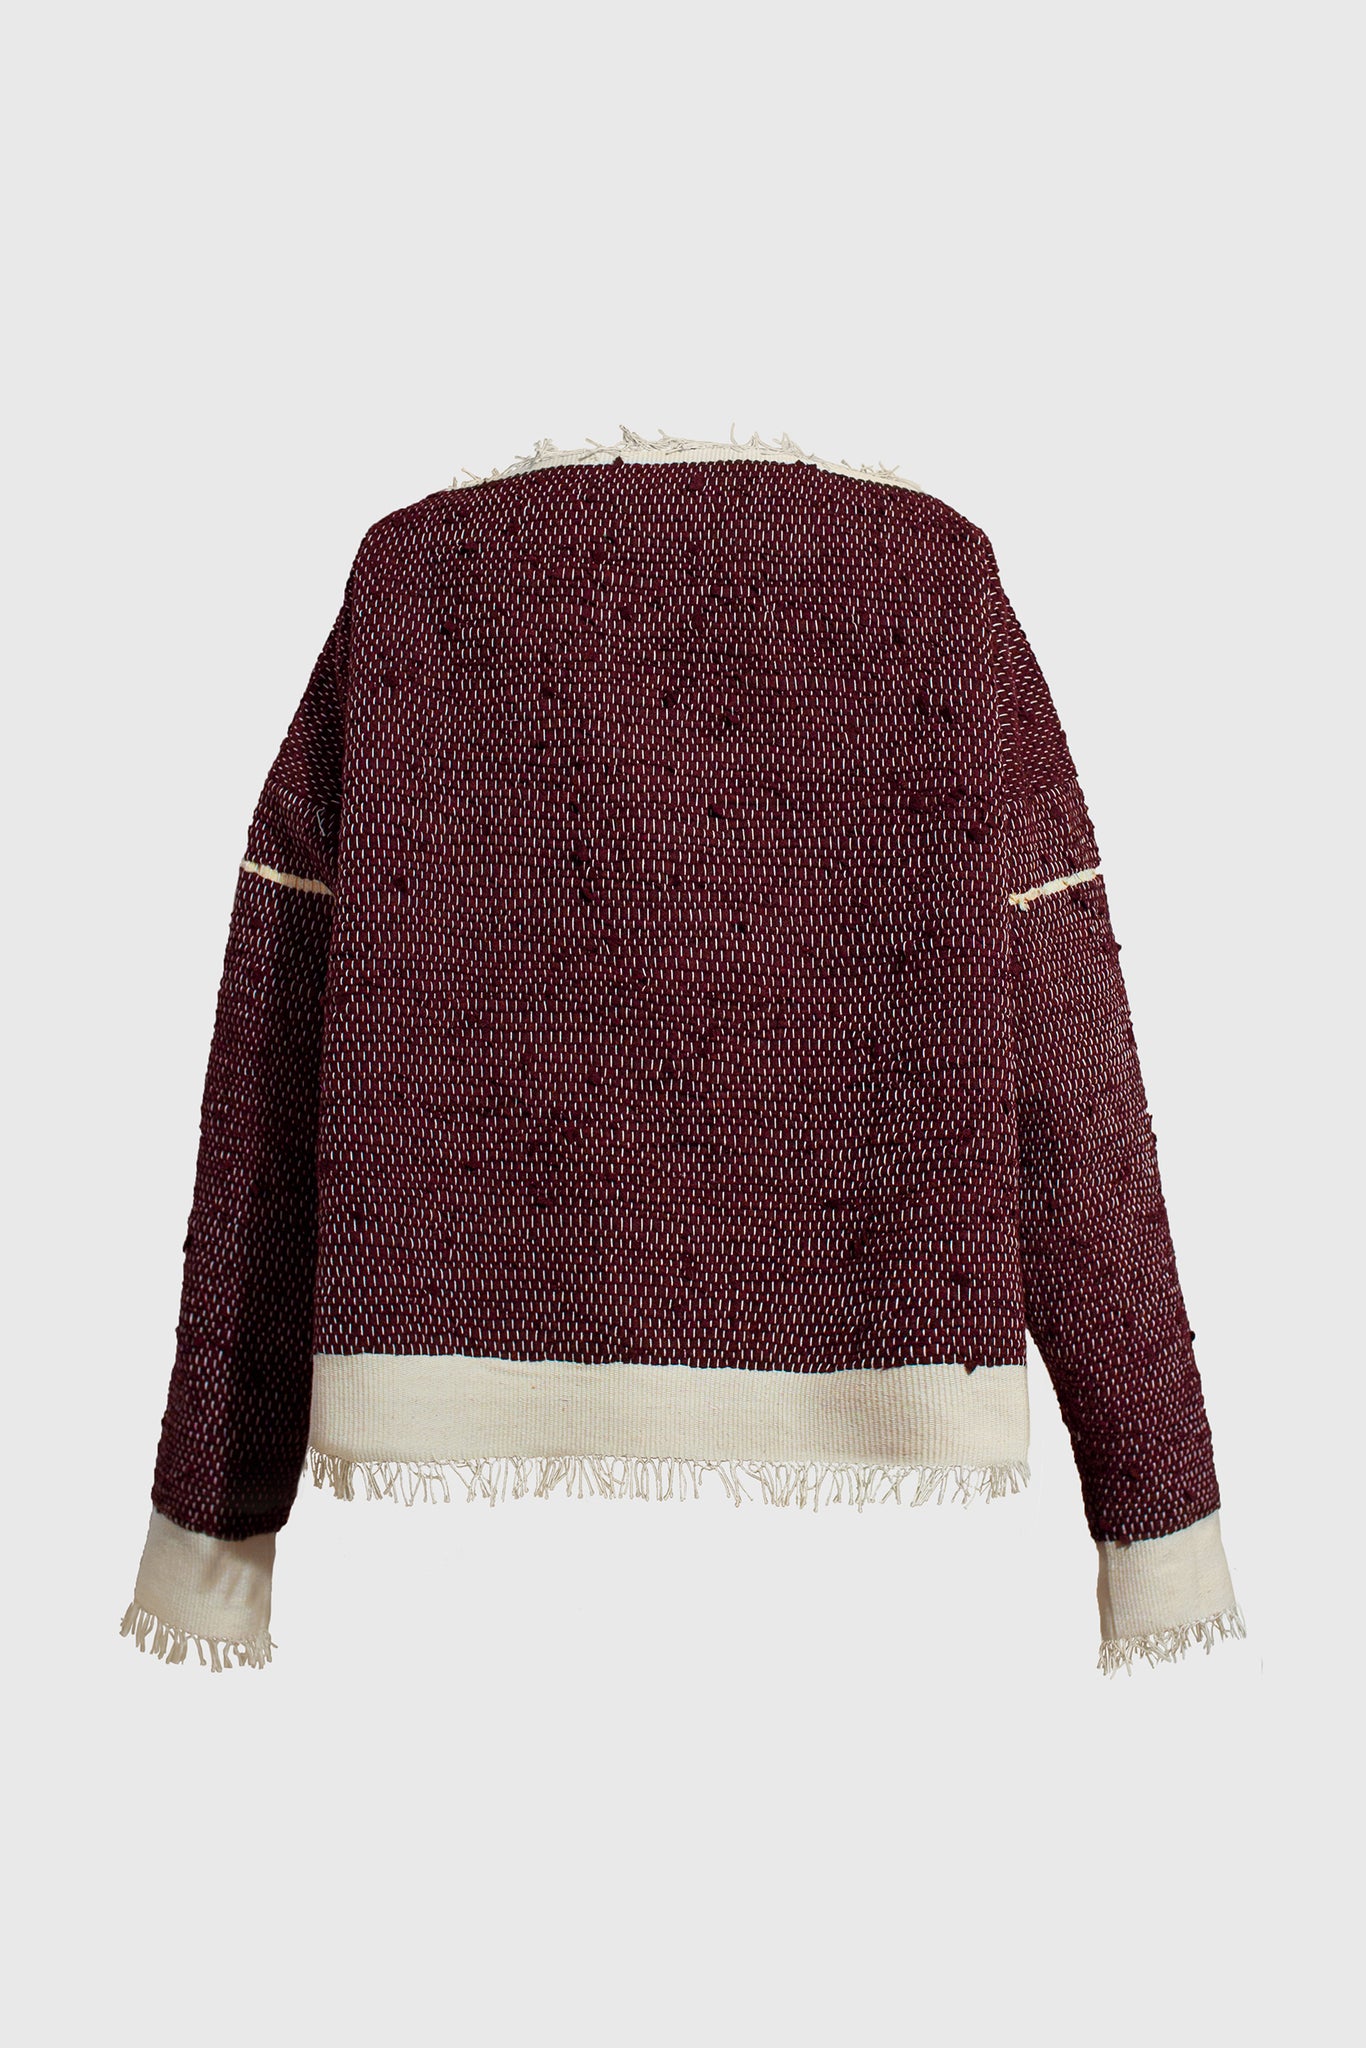 Virgin Wool sweater, knitwear and woven, super warm, handmade, meticulous, detailed, embroidery, blood red color, with butter white accents, perfect for Christmas outfits,, gifts, wearing at home, feel warm